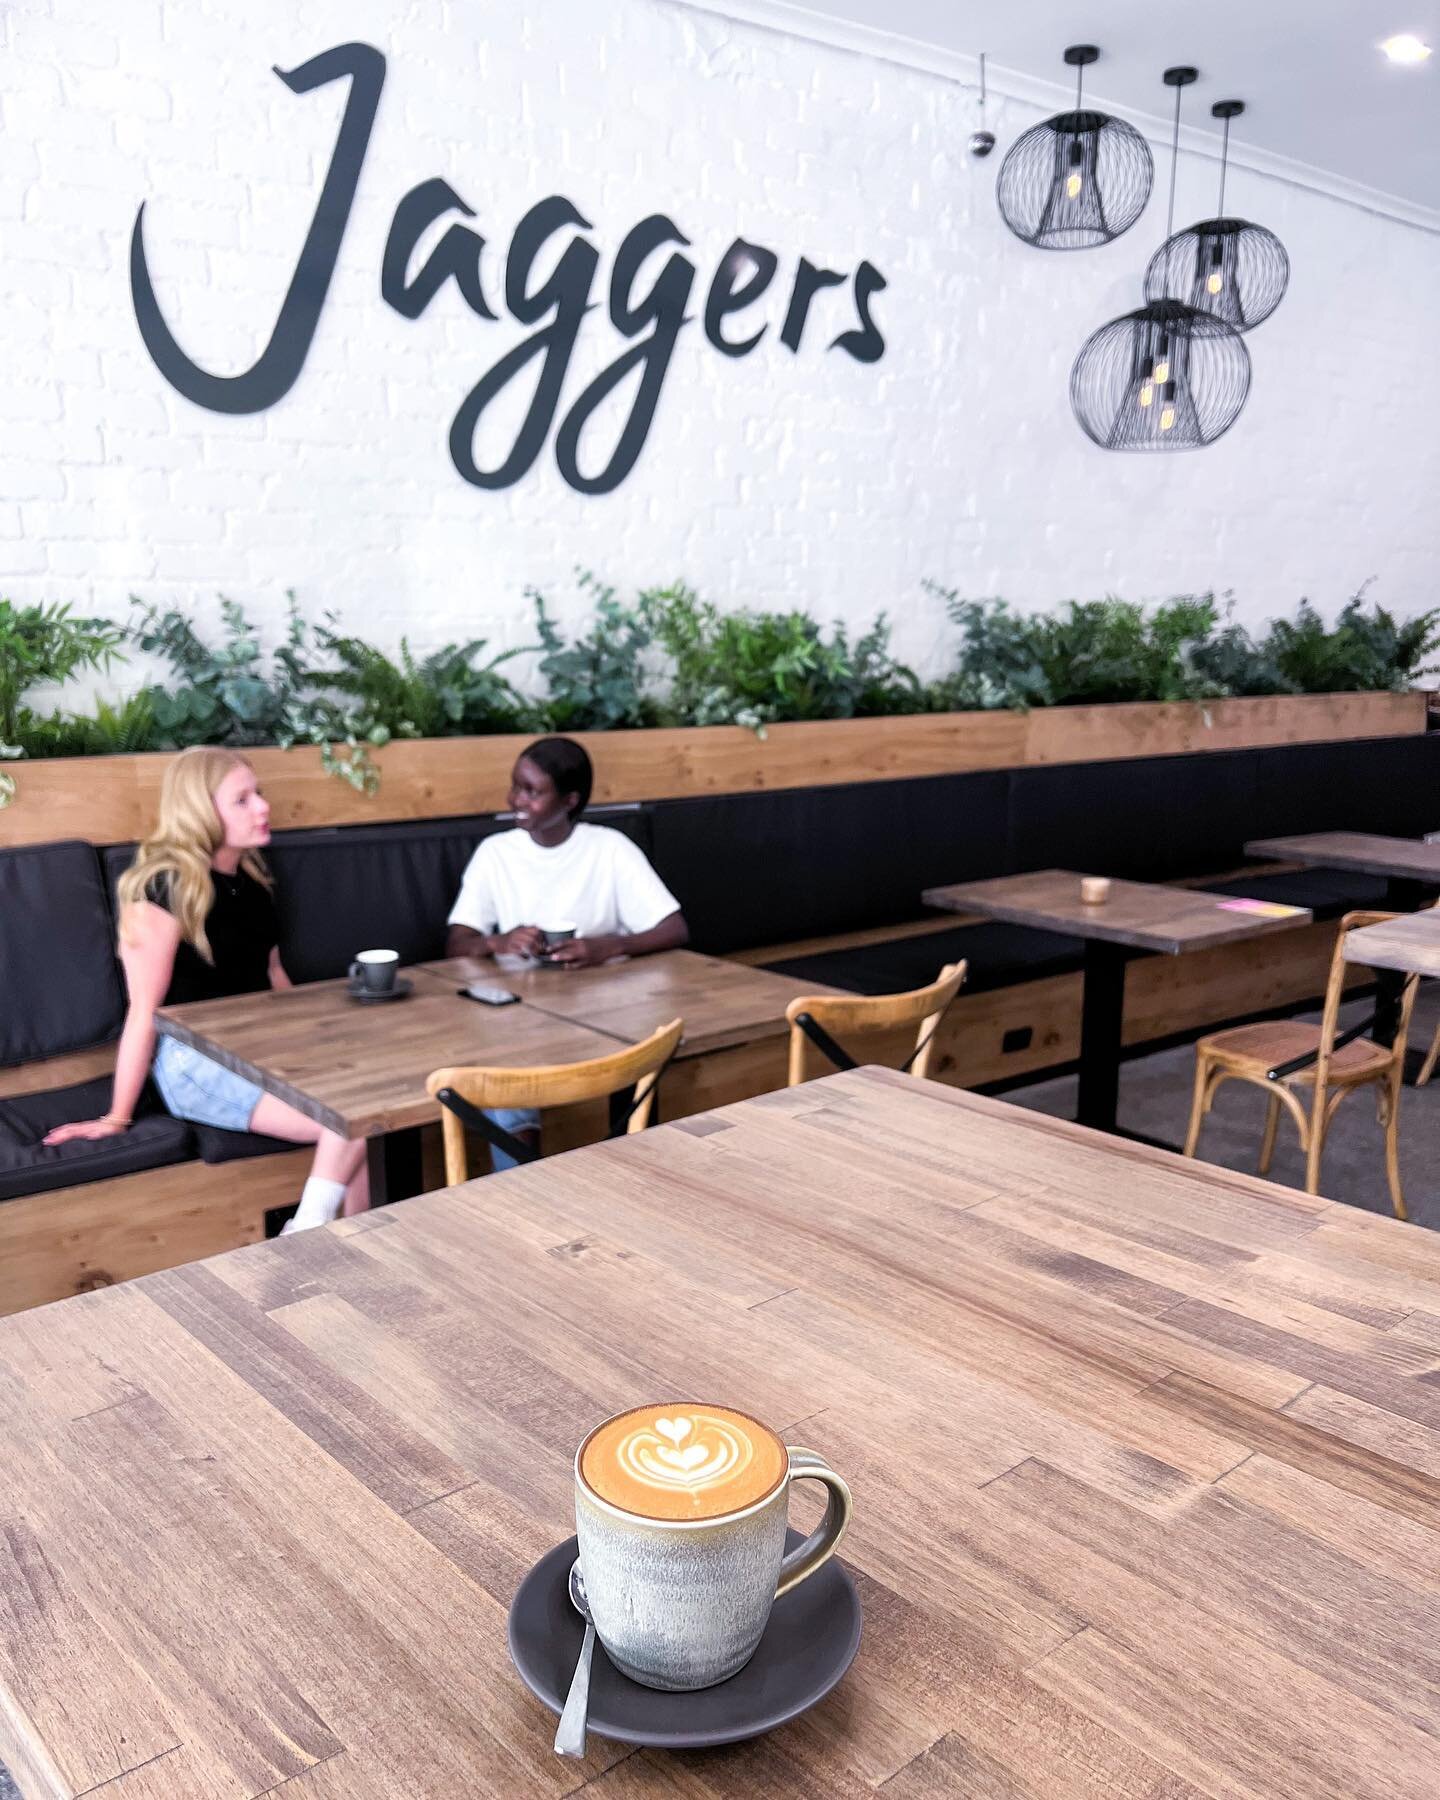 Start your day right at Jaggers 🥰